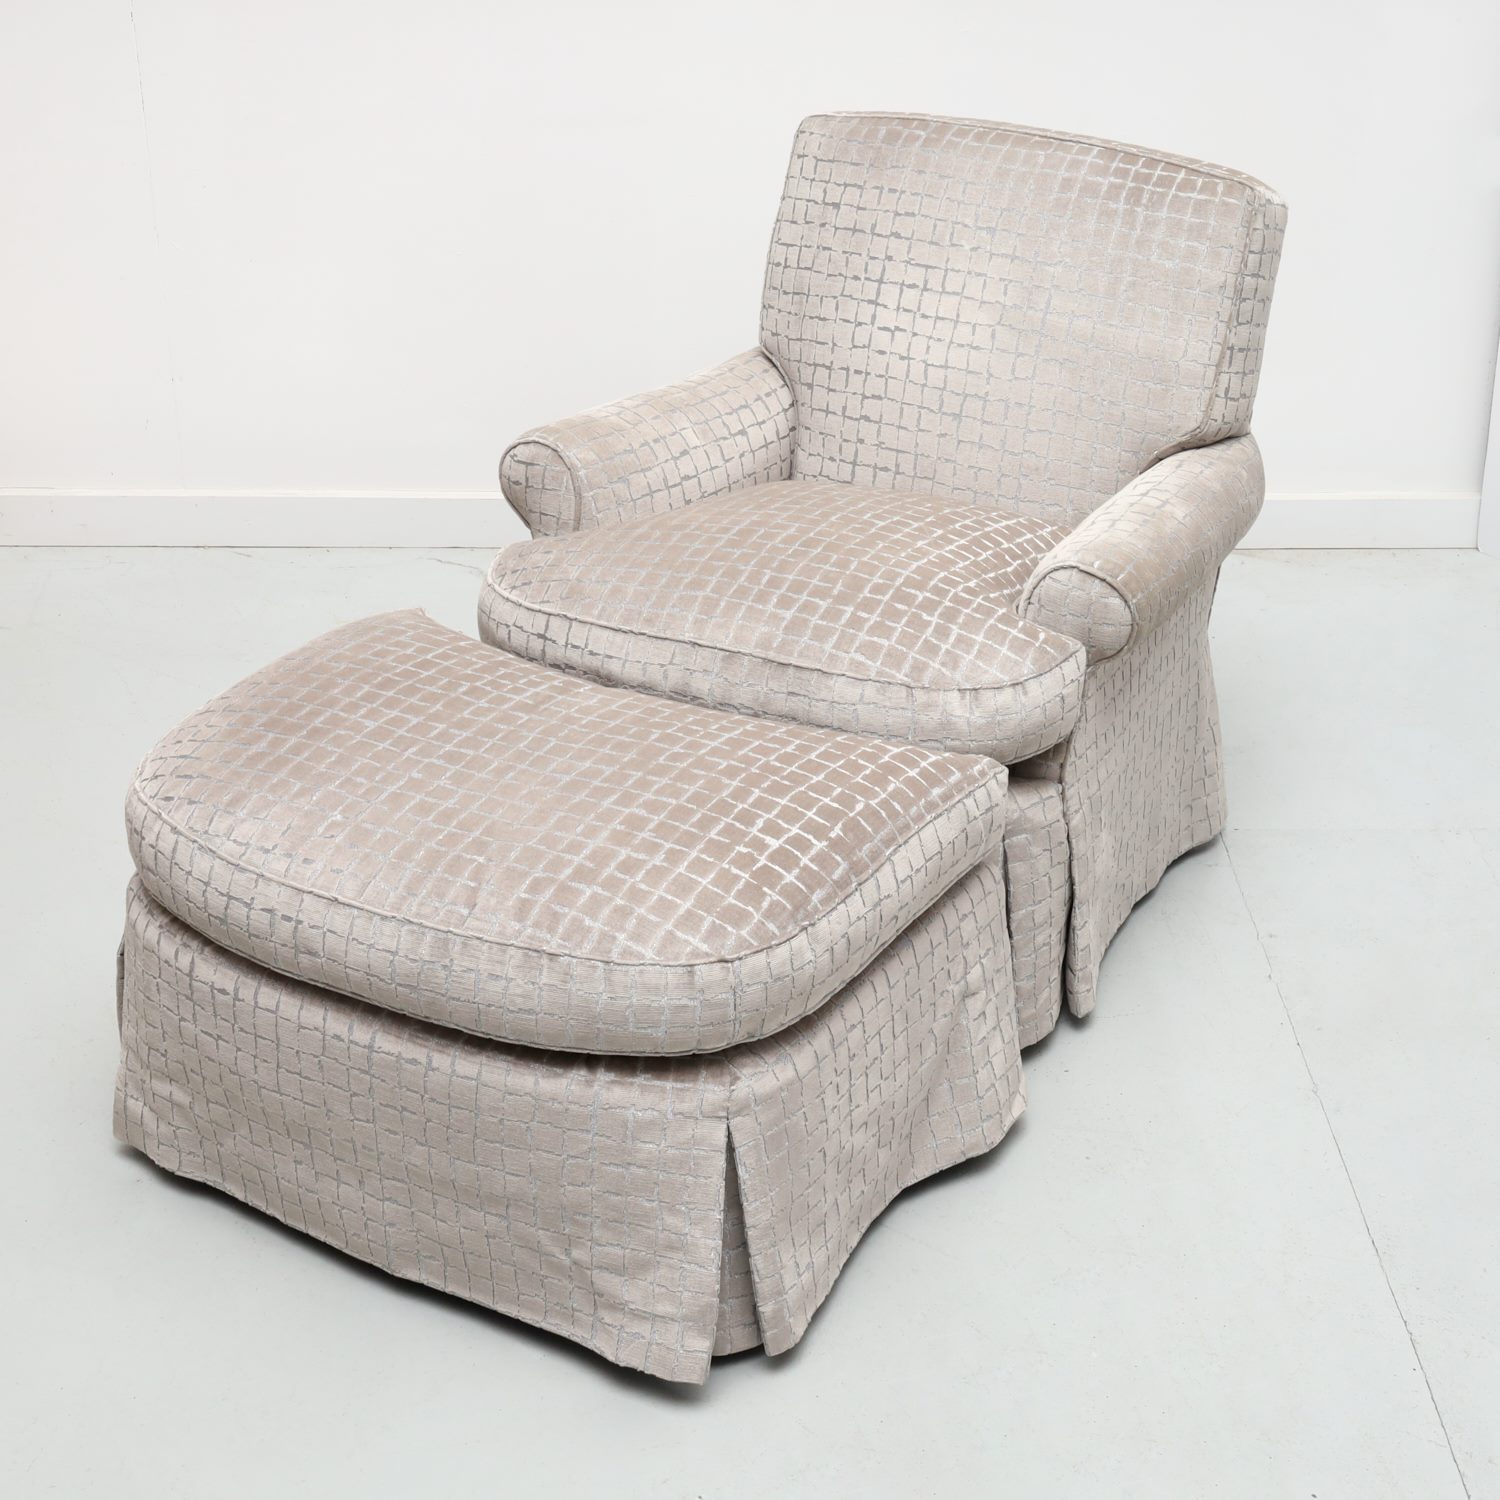 DESIGNER UPHOLSTERED CLUB CHAIR 361d2a